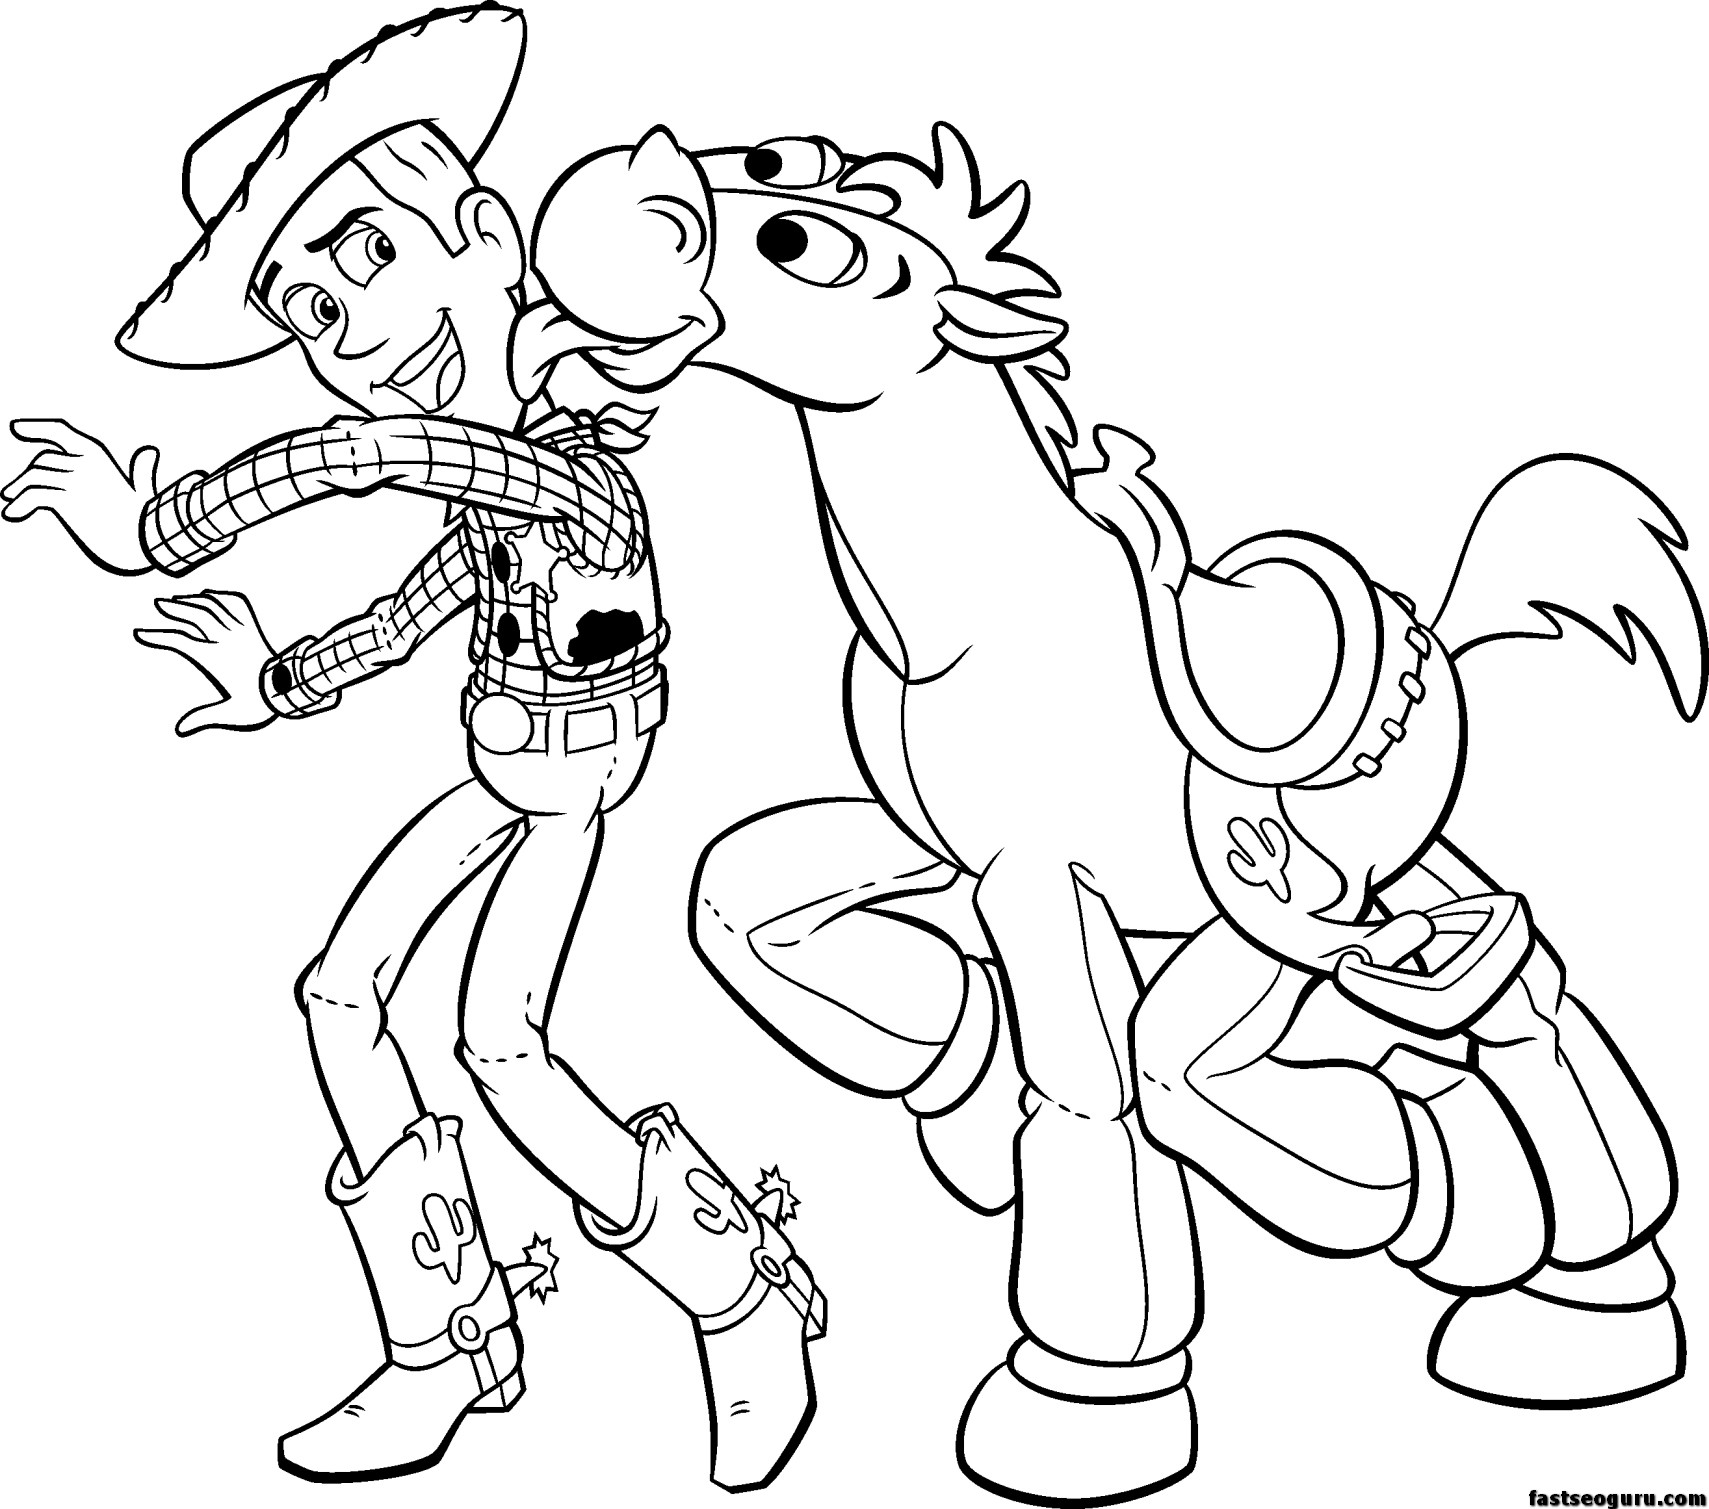 Printable Toy Story 3 Woody Bullseye Coloring pages